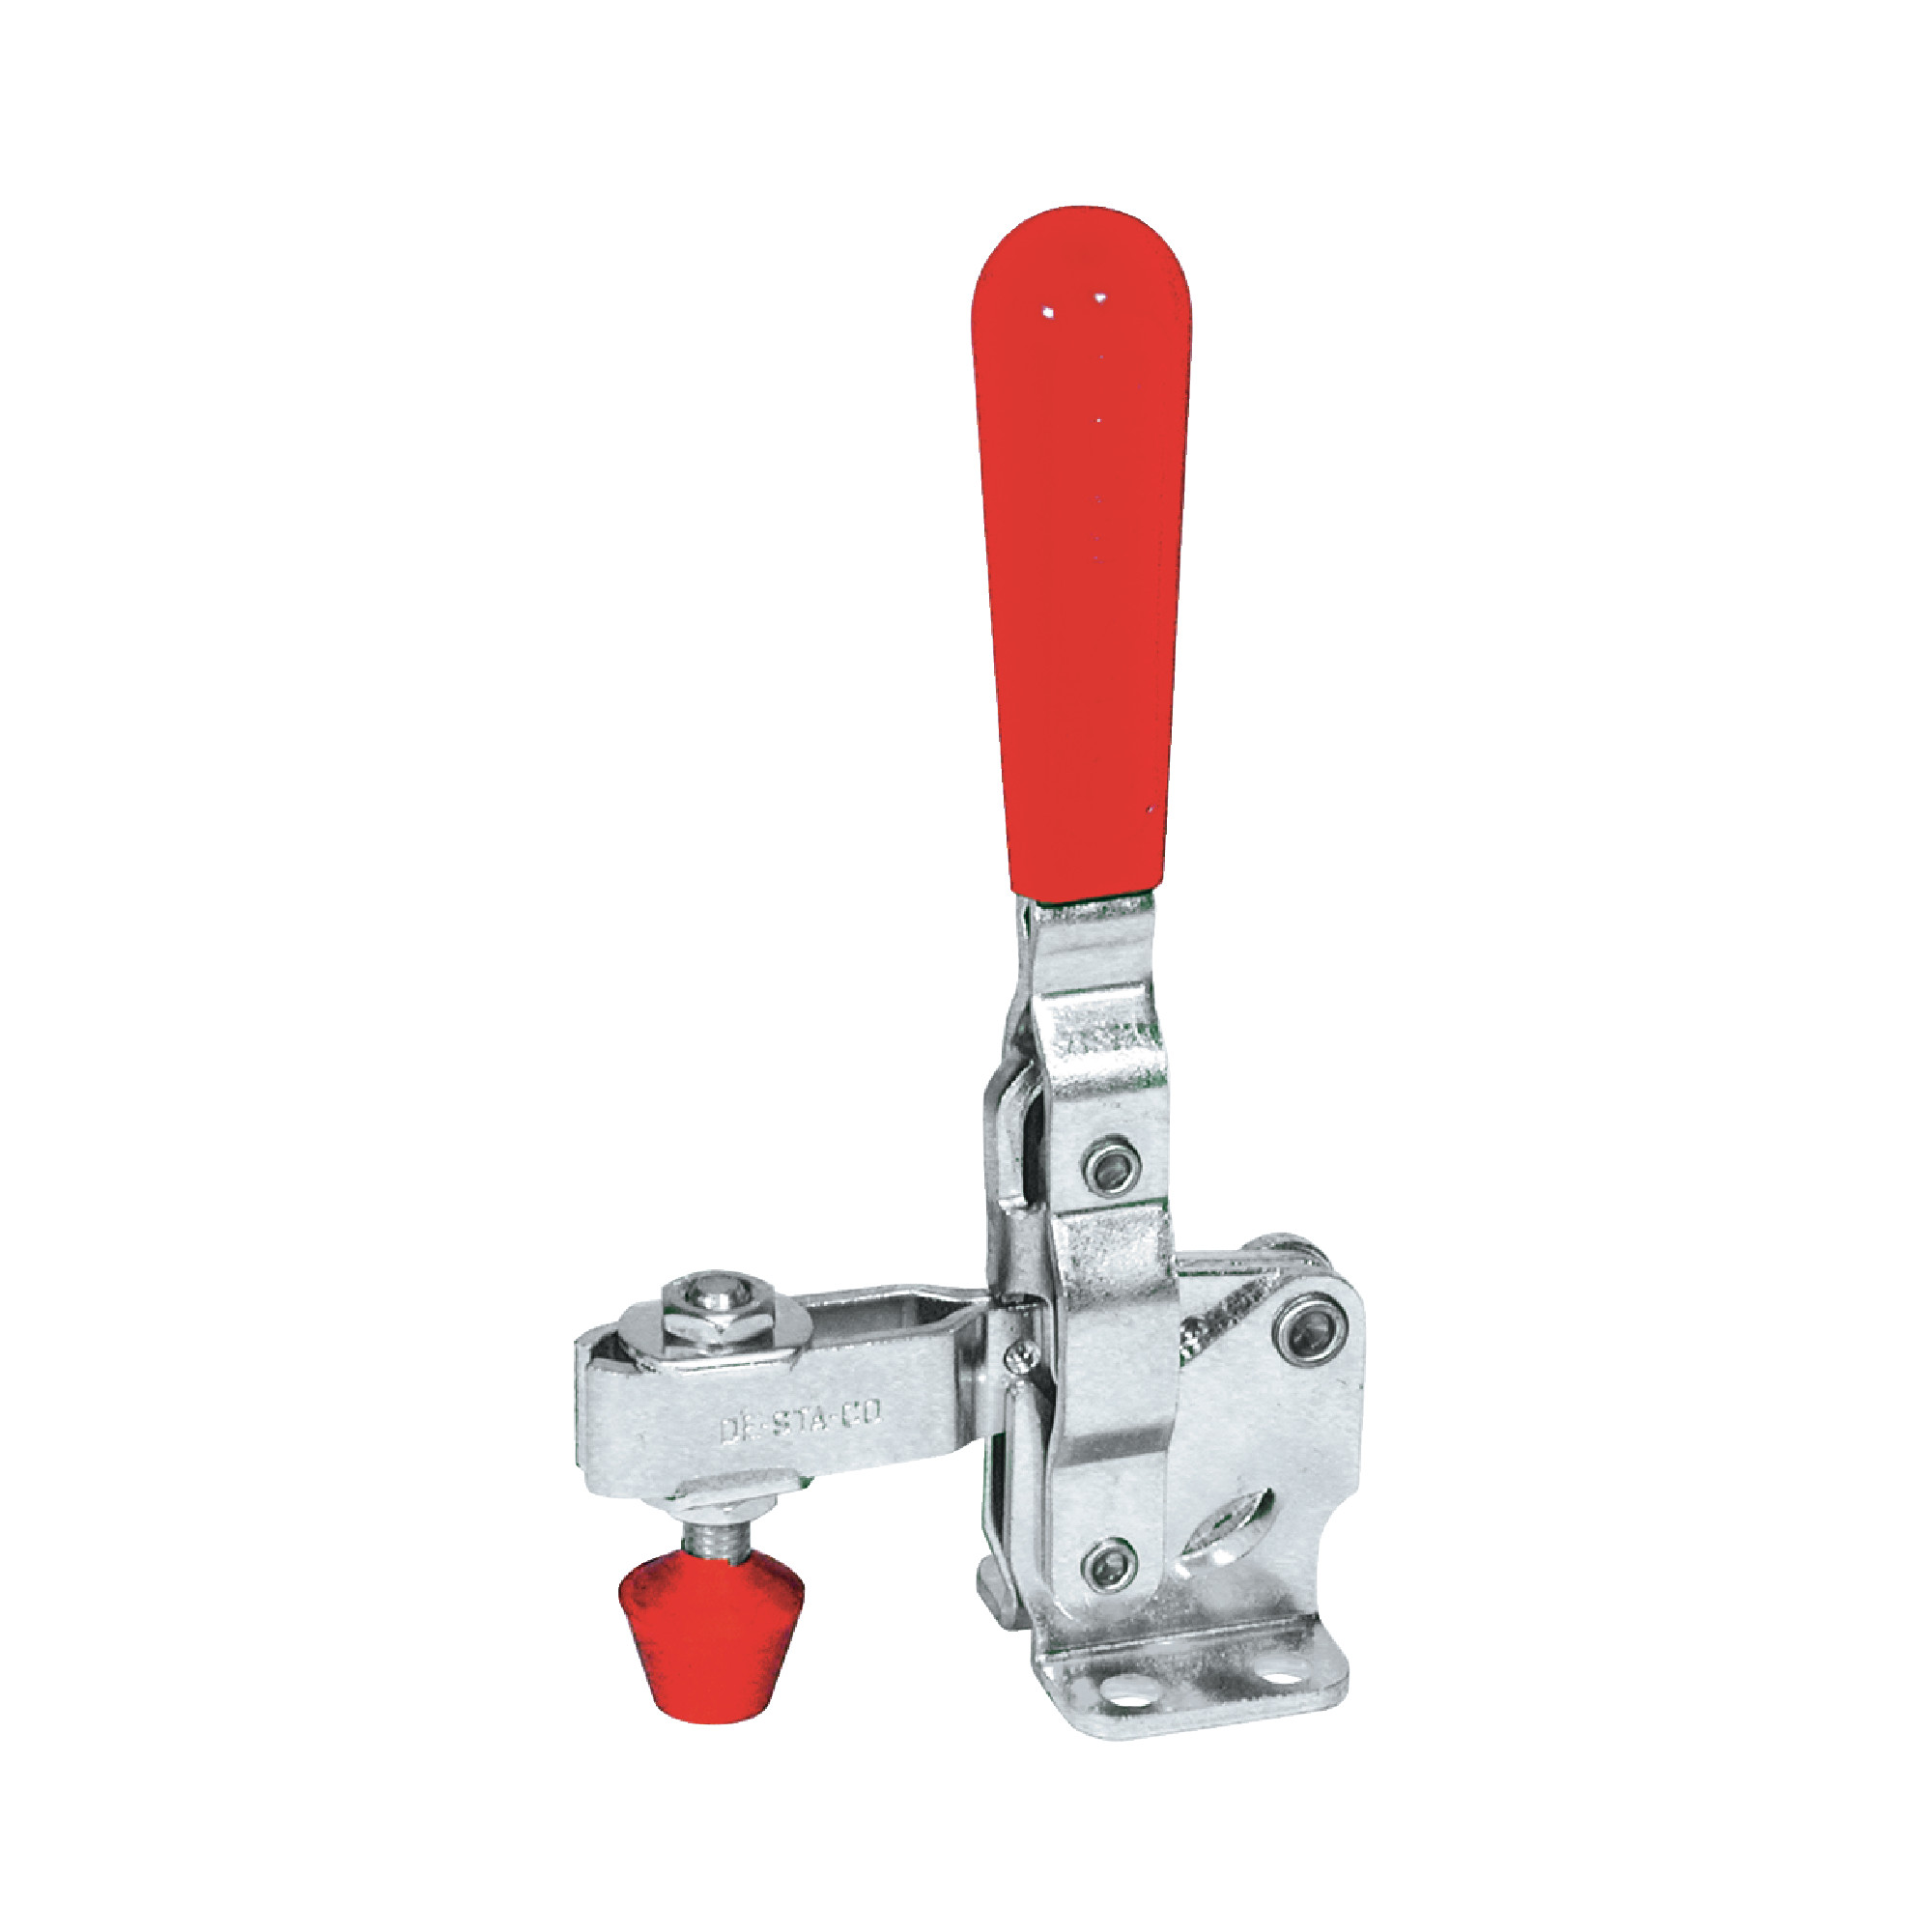 Vertical Hold Down Action Toggle Clamp